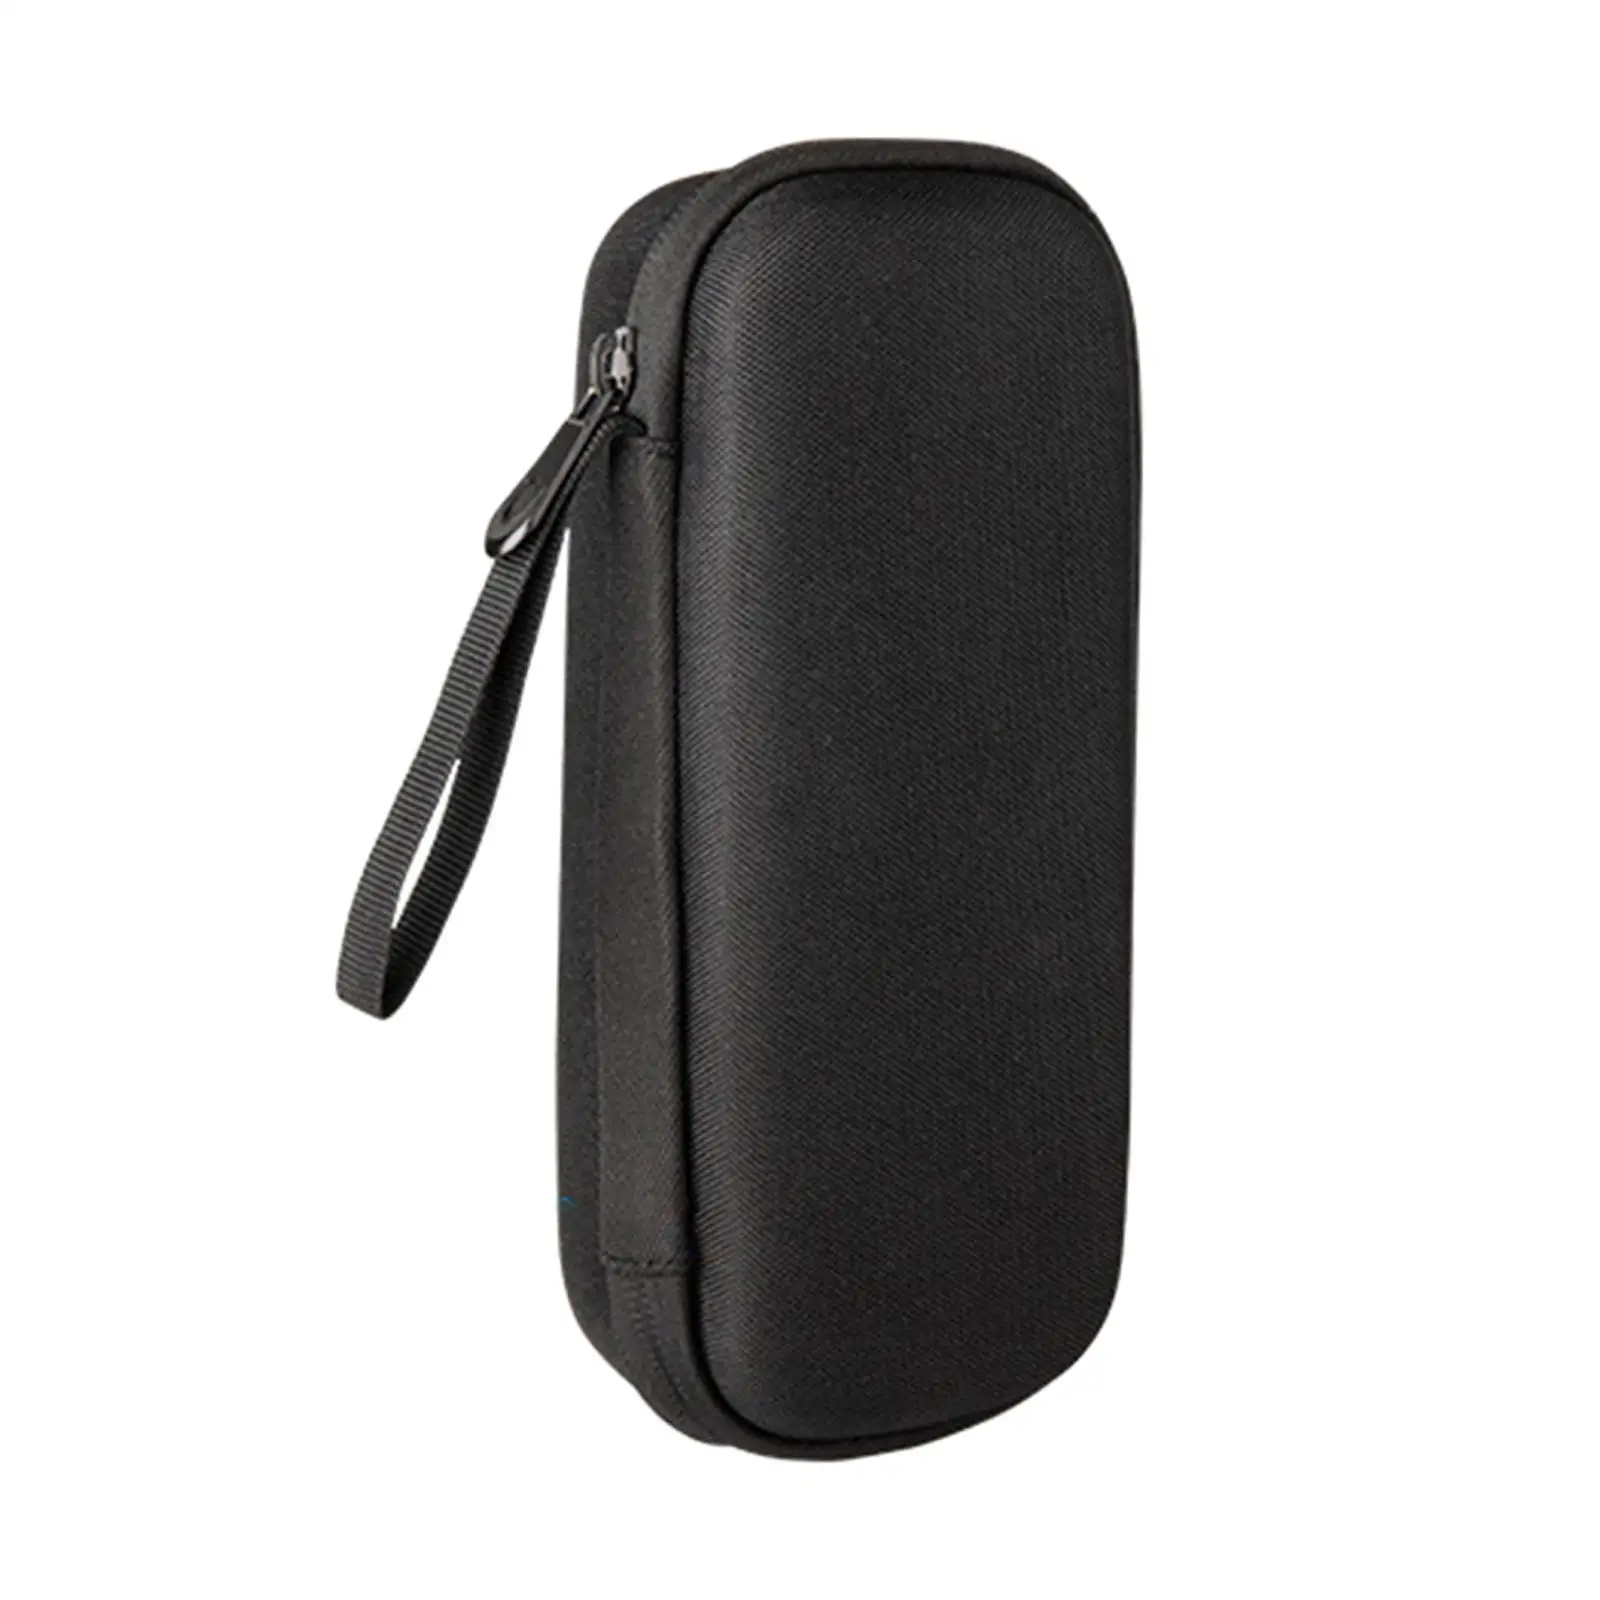 Hard Travel EVA Case Shockproof Portable Hard Shell Carrying Case for Cable Cord Electronic Accessories Charger Cell Phone